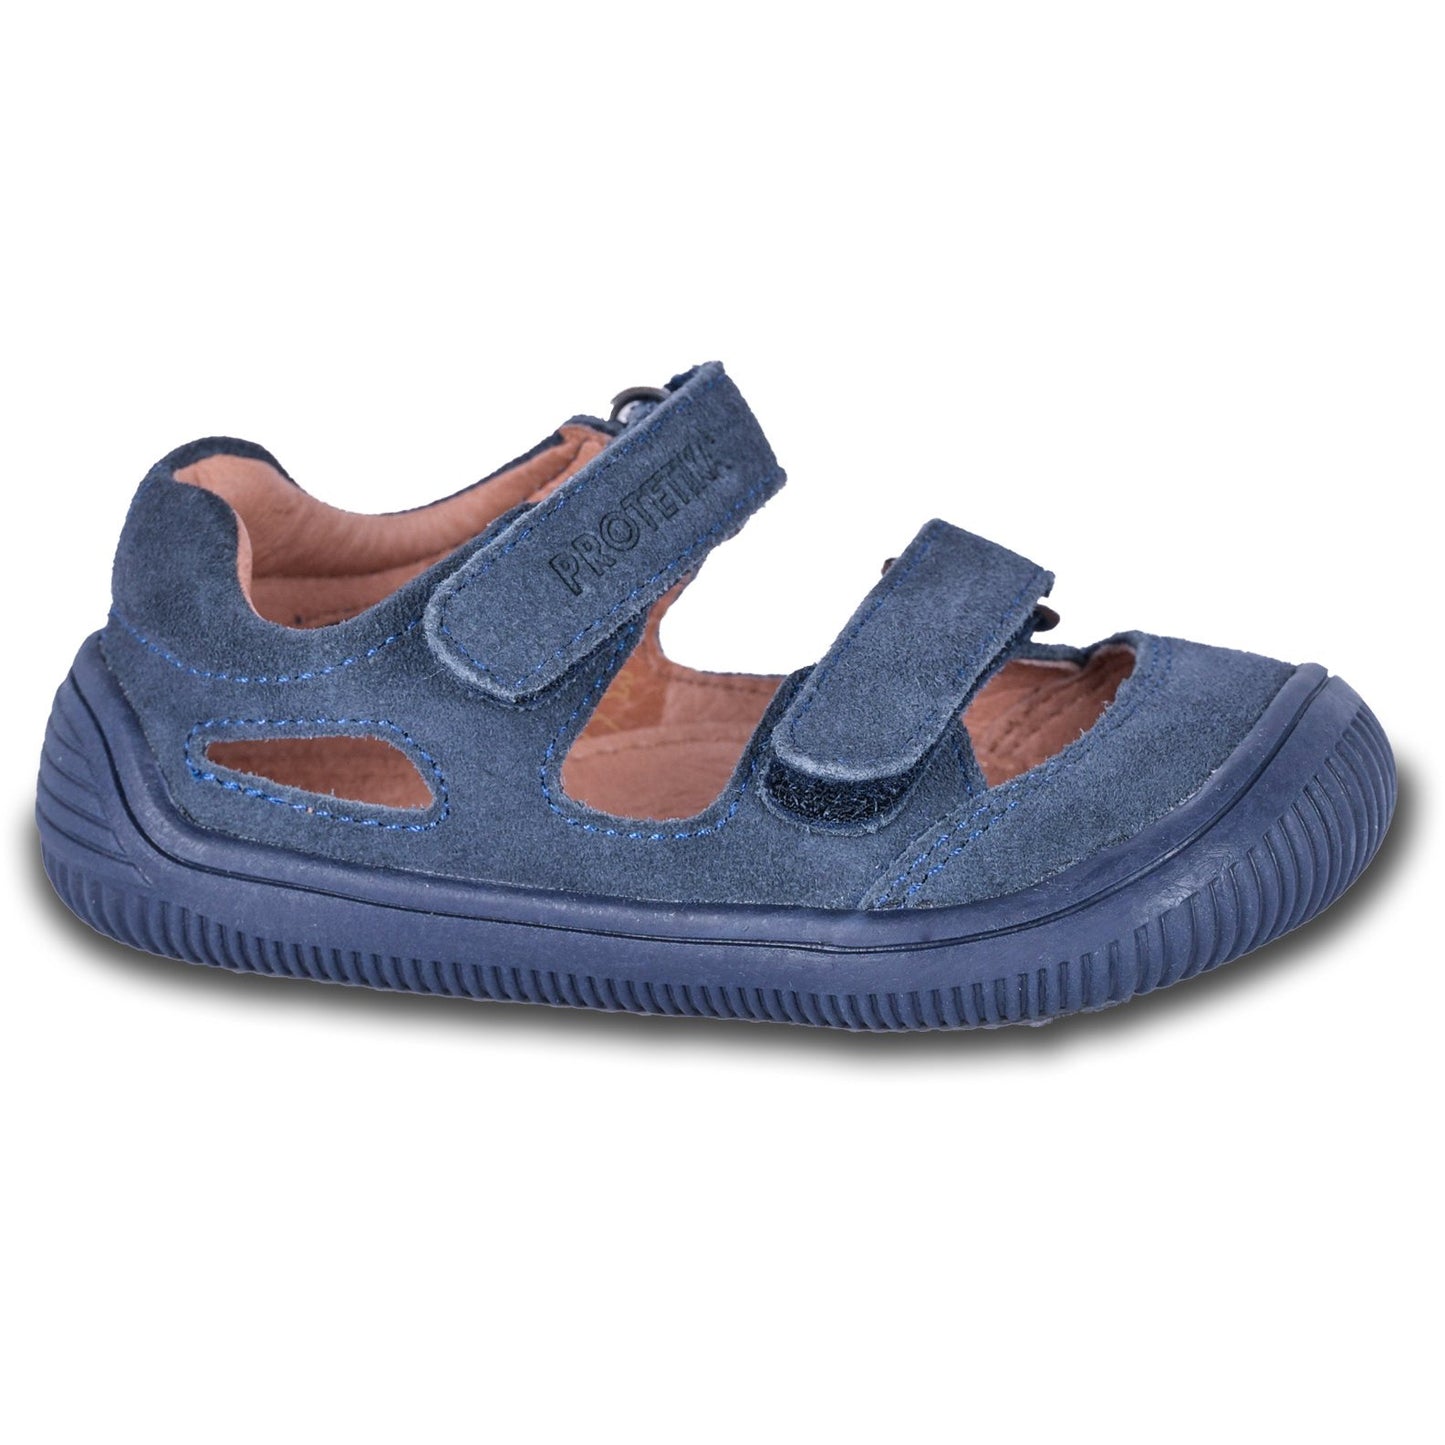 Barefoot sneakers BERG marine for toddler boys from Protetika brand.